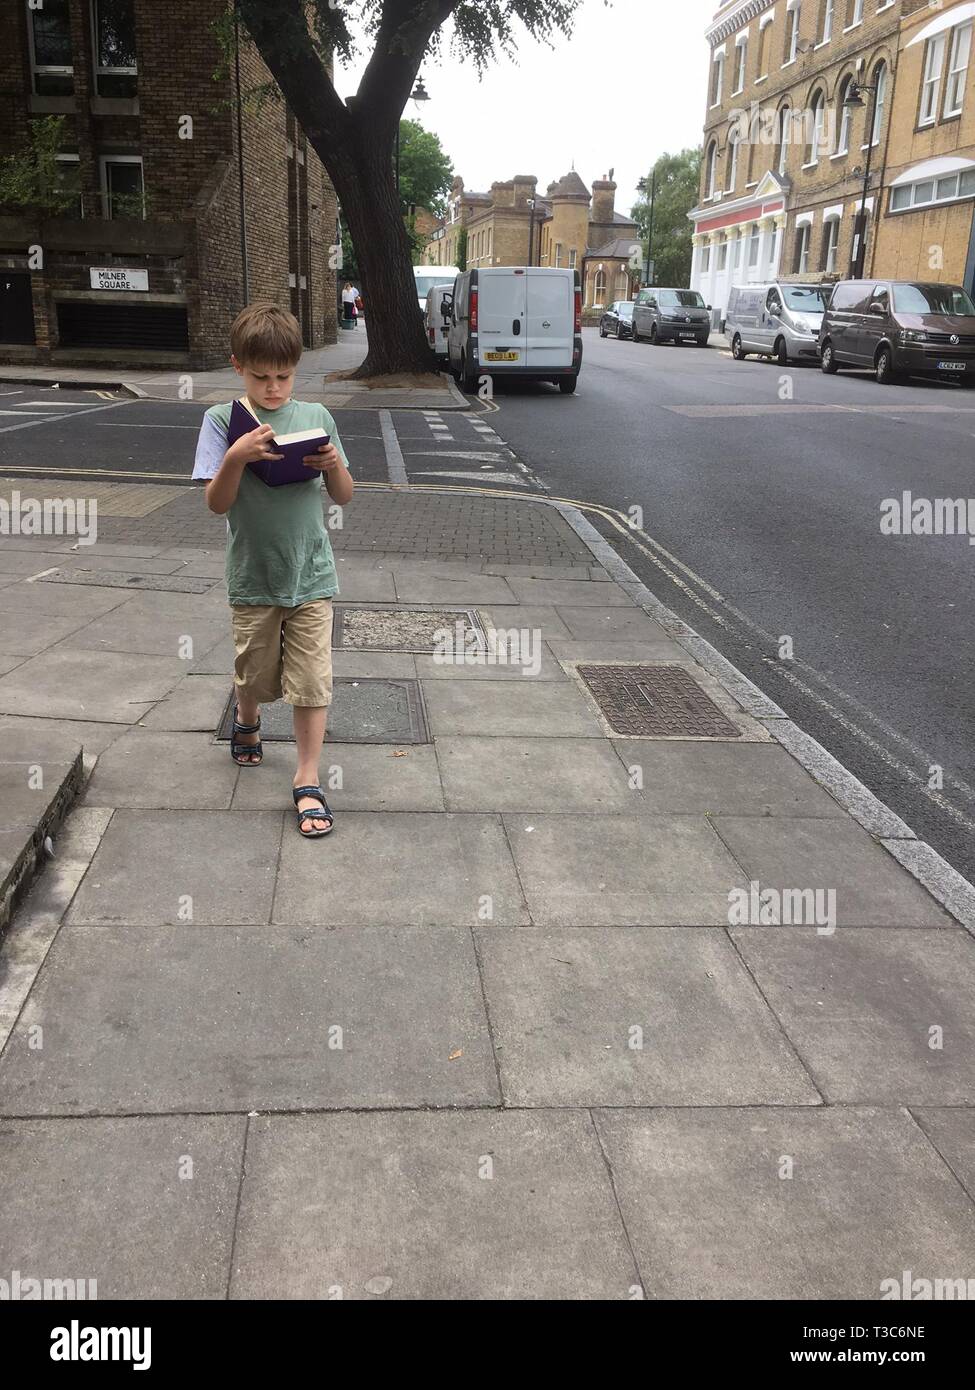 9 year old walking along the pavement while reading a book Stock Photo